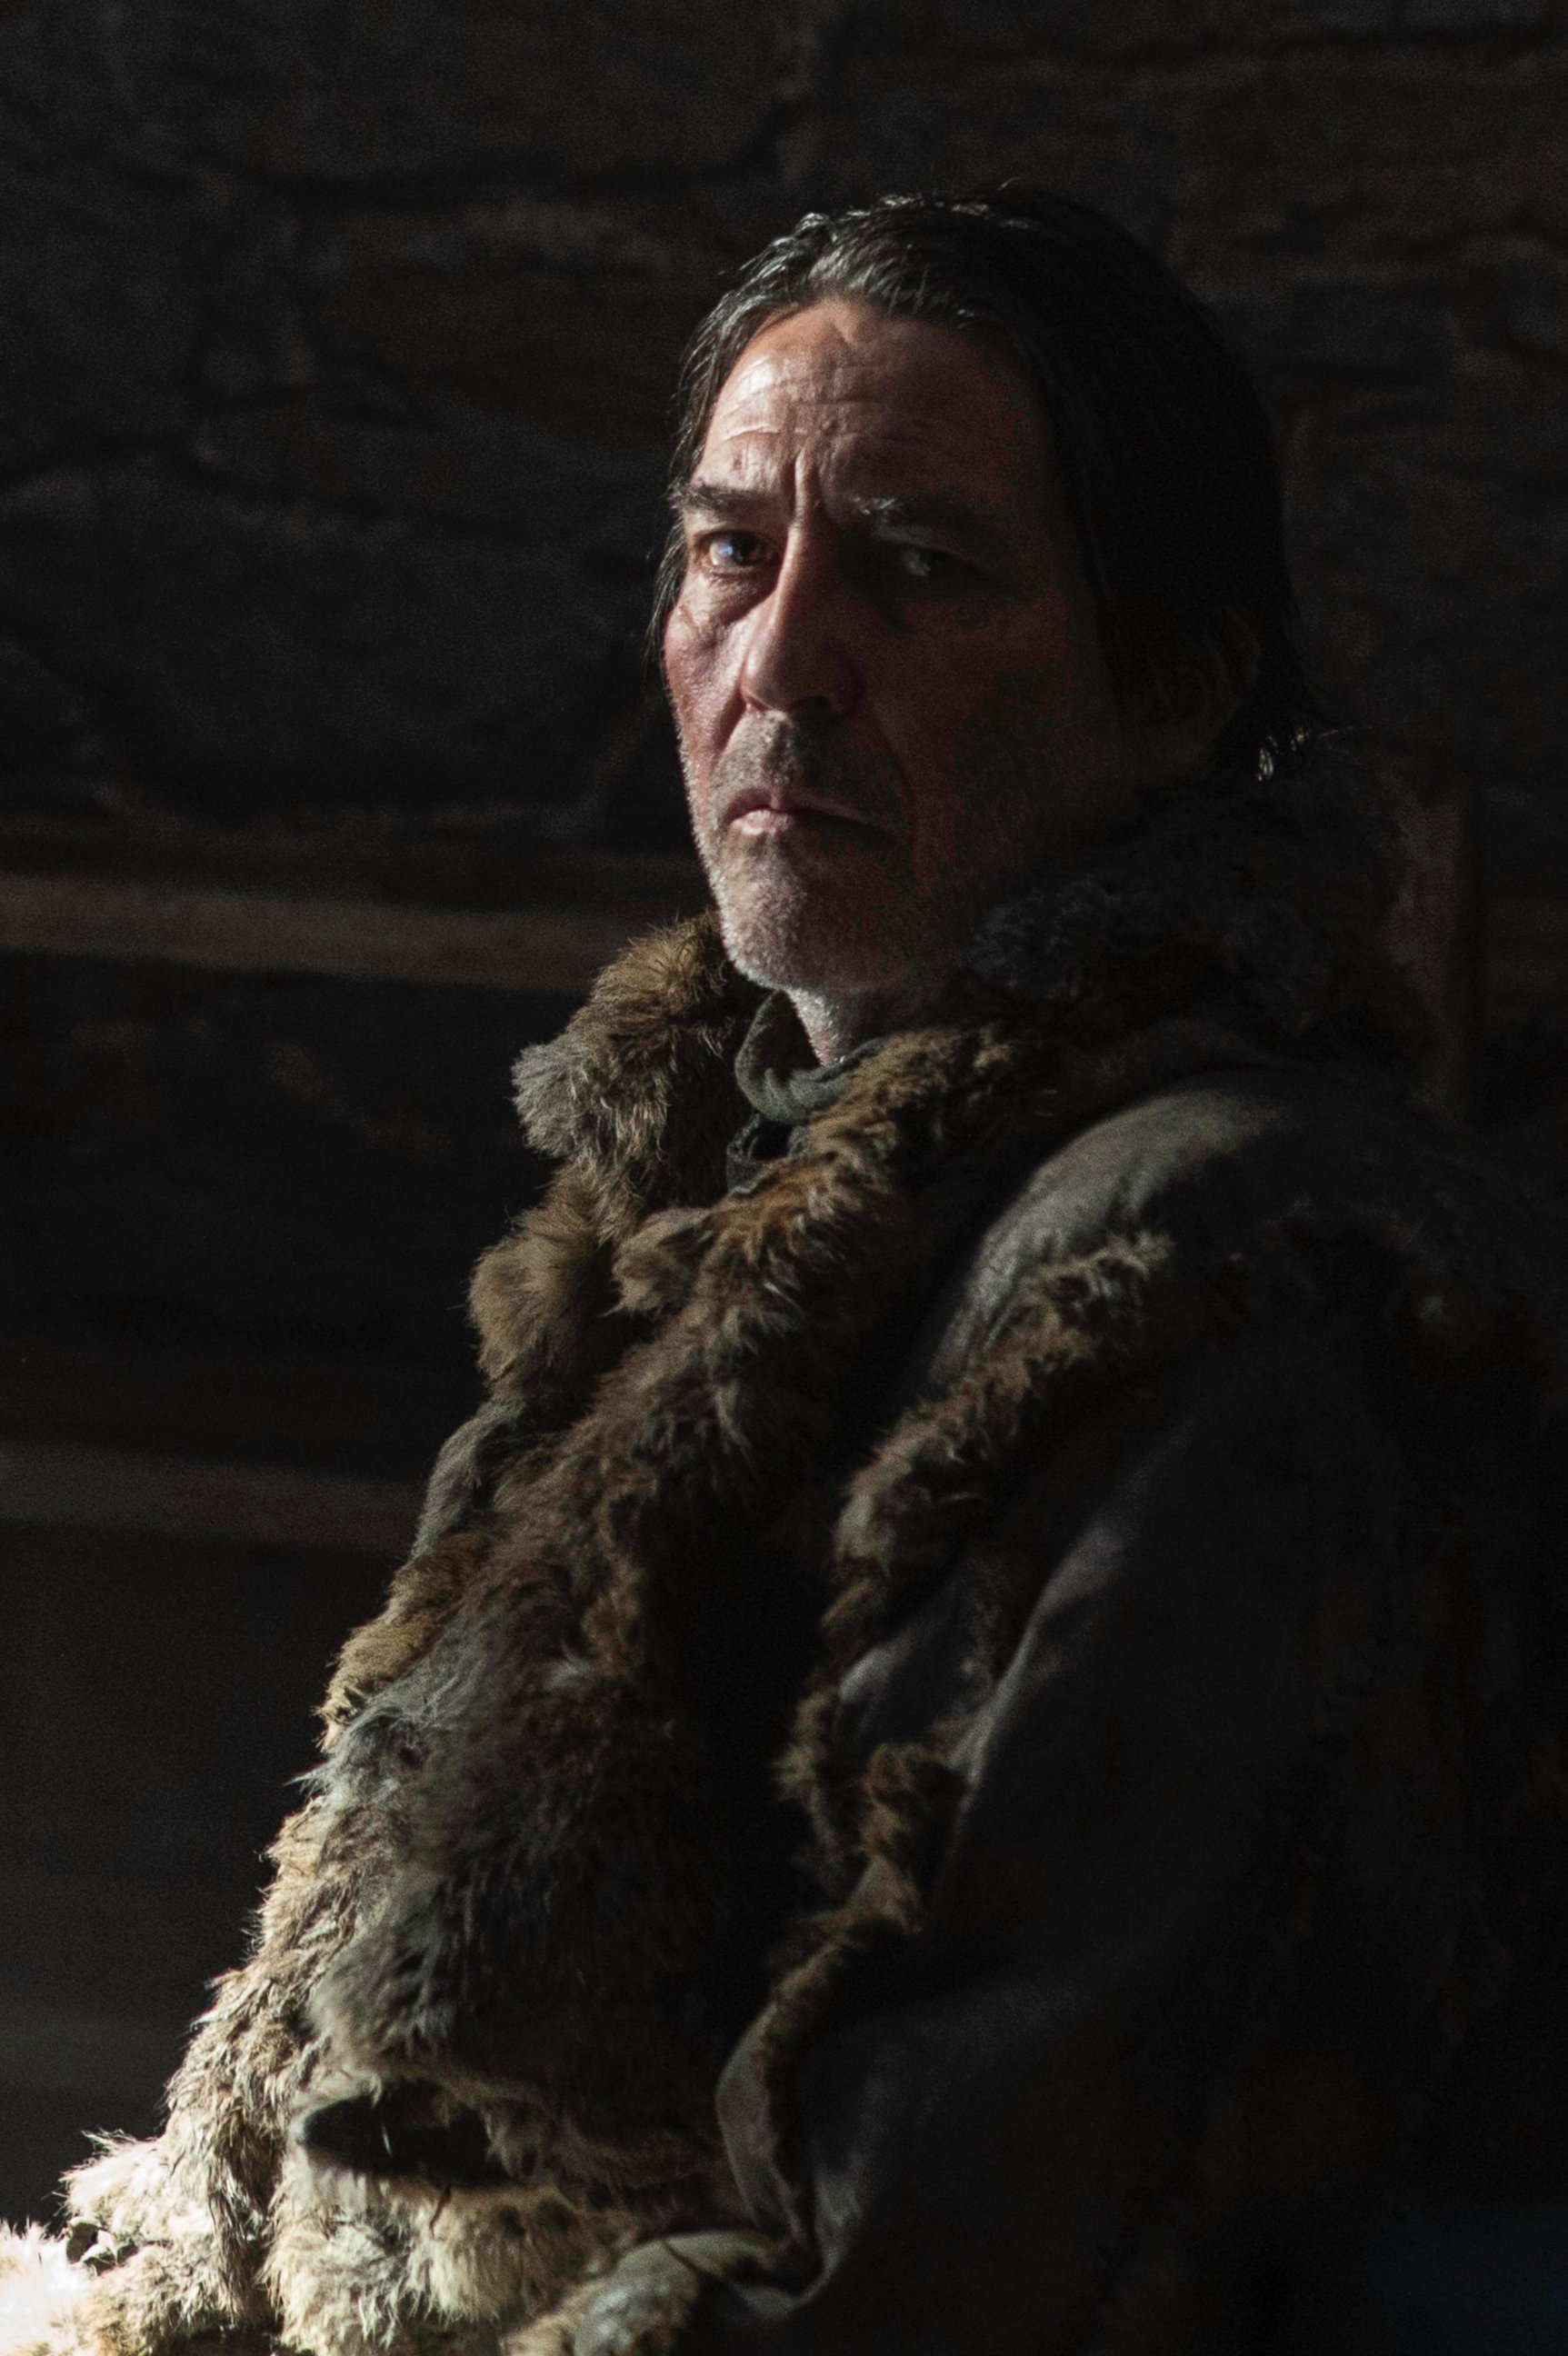 PHOTO: Manse, from the fifth season of the HBO show, Game of Thrones. 